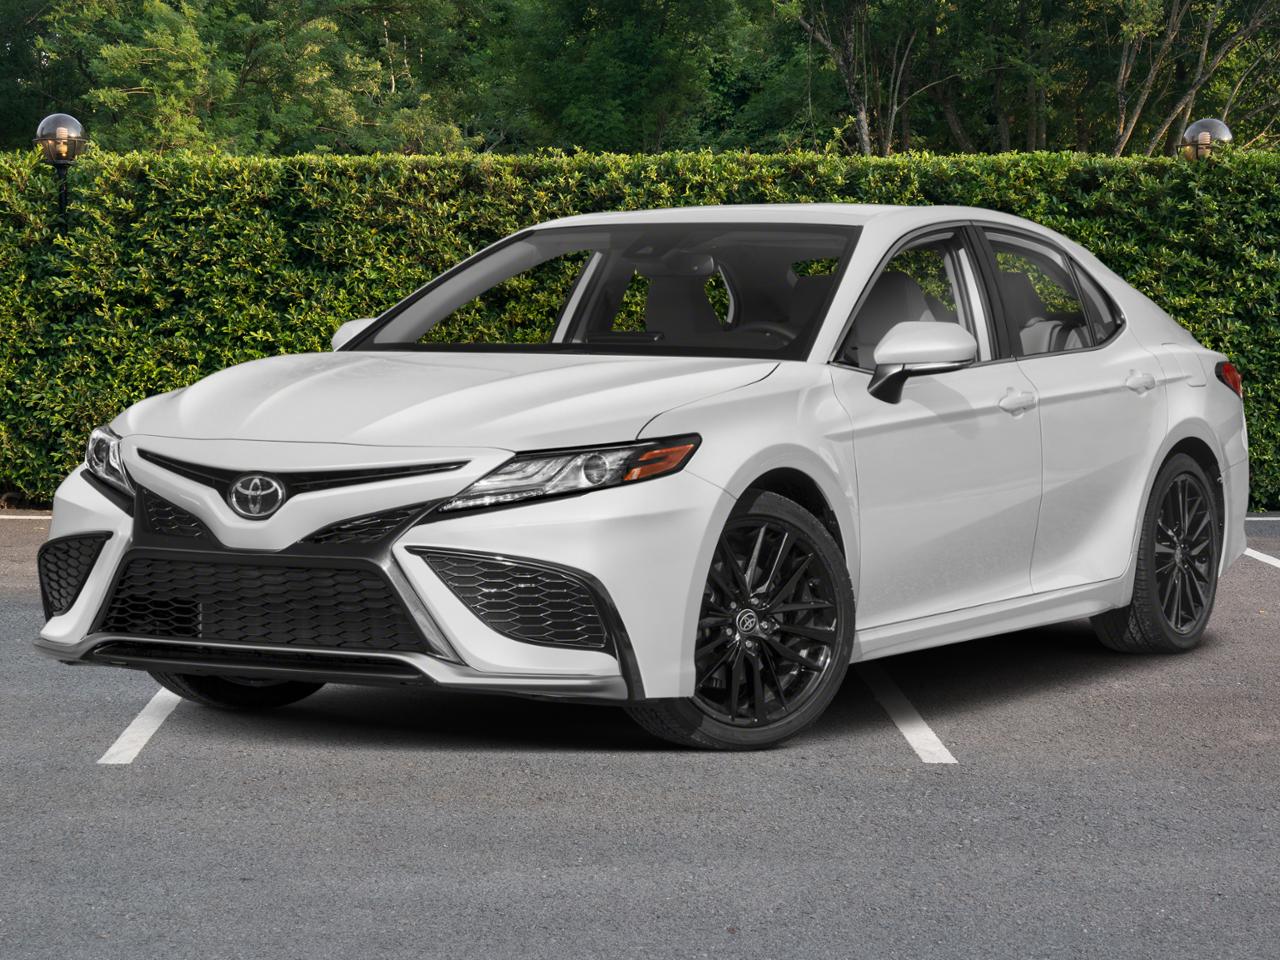 Toyota Camry XSE V6 for sale Used Camry XSE V6 near you in the US